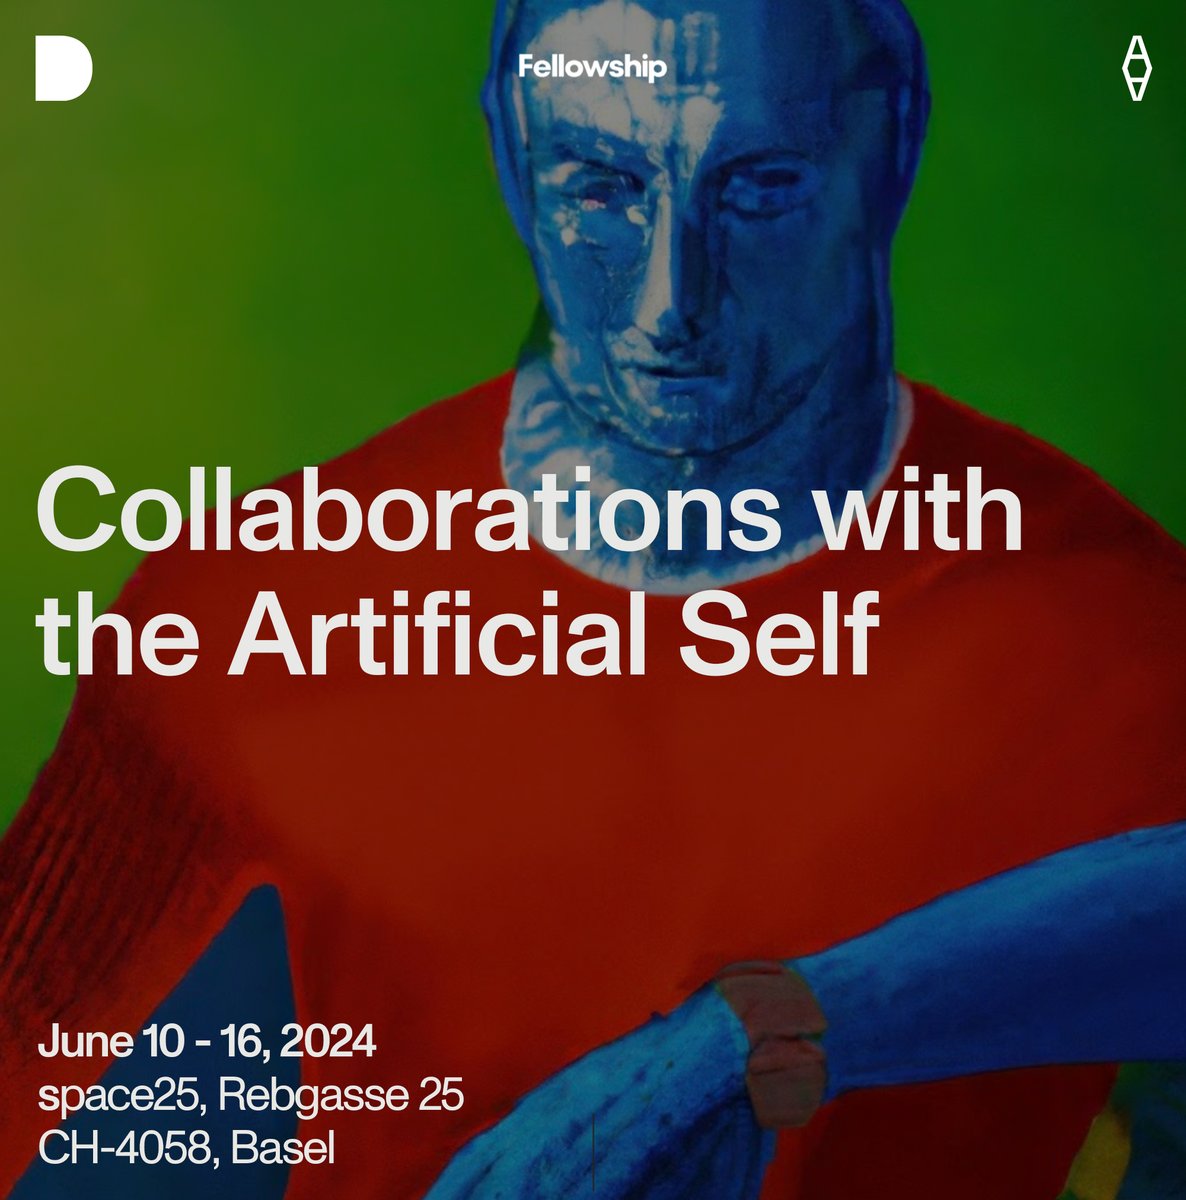 Presenting: Collaborations with the Artificial Self Join us at Fellowship’s most ambitious exhibition to date, opening during Art Basel from June 10-16 at space25 in Basel, Switzerland. Explore the evolution of AI in art, from the 2010s deep learning revolution to today's…